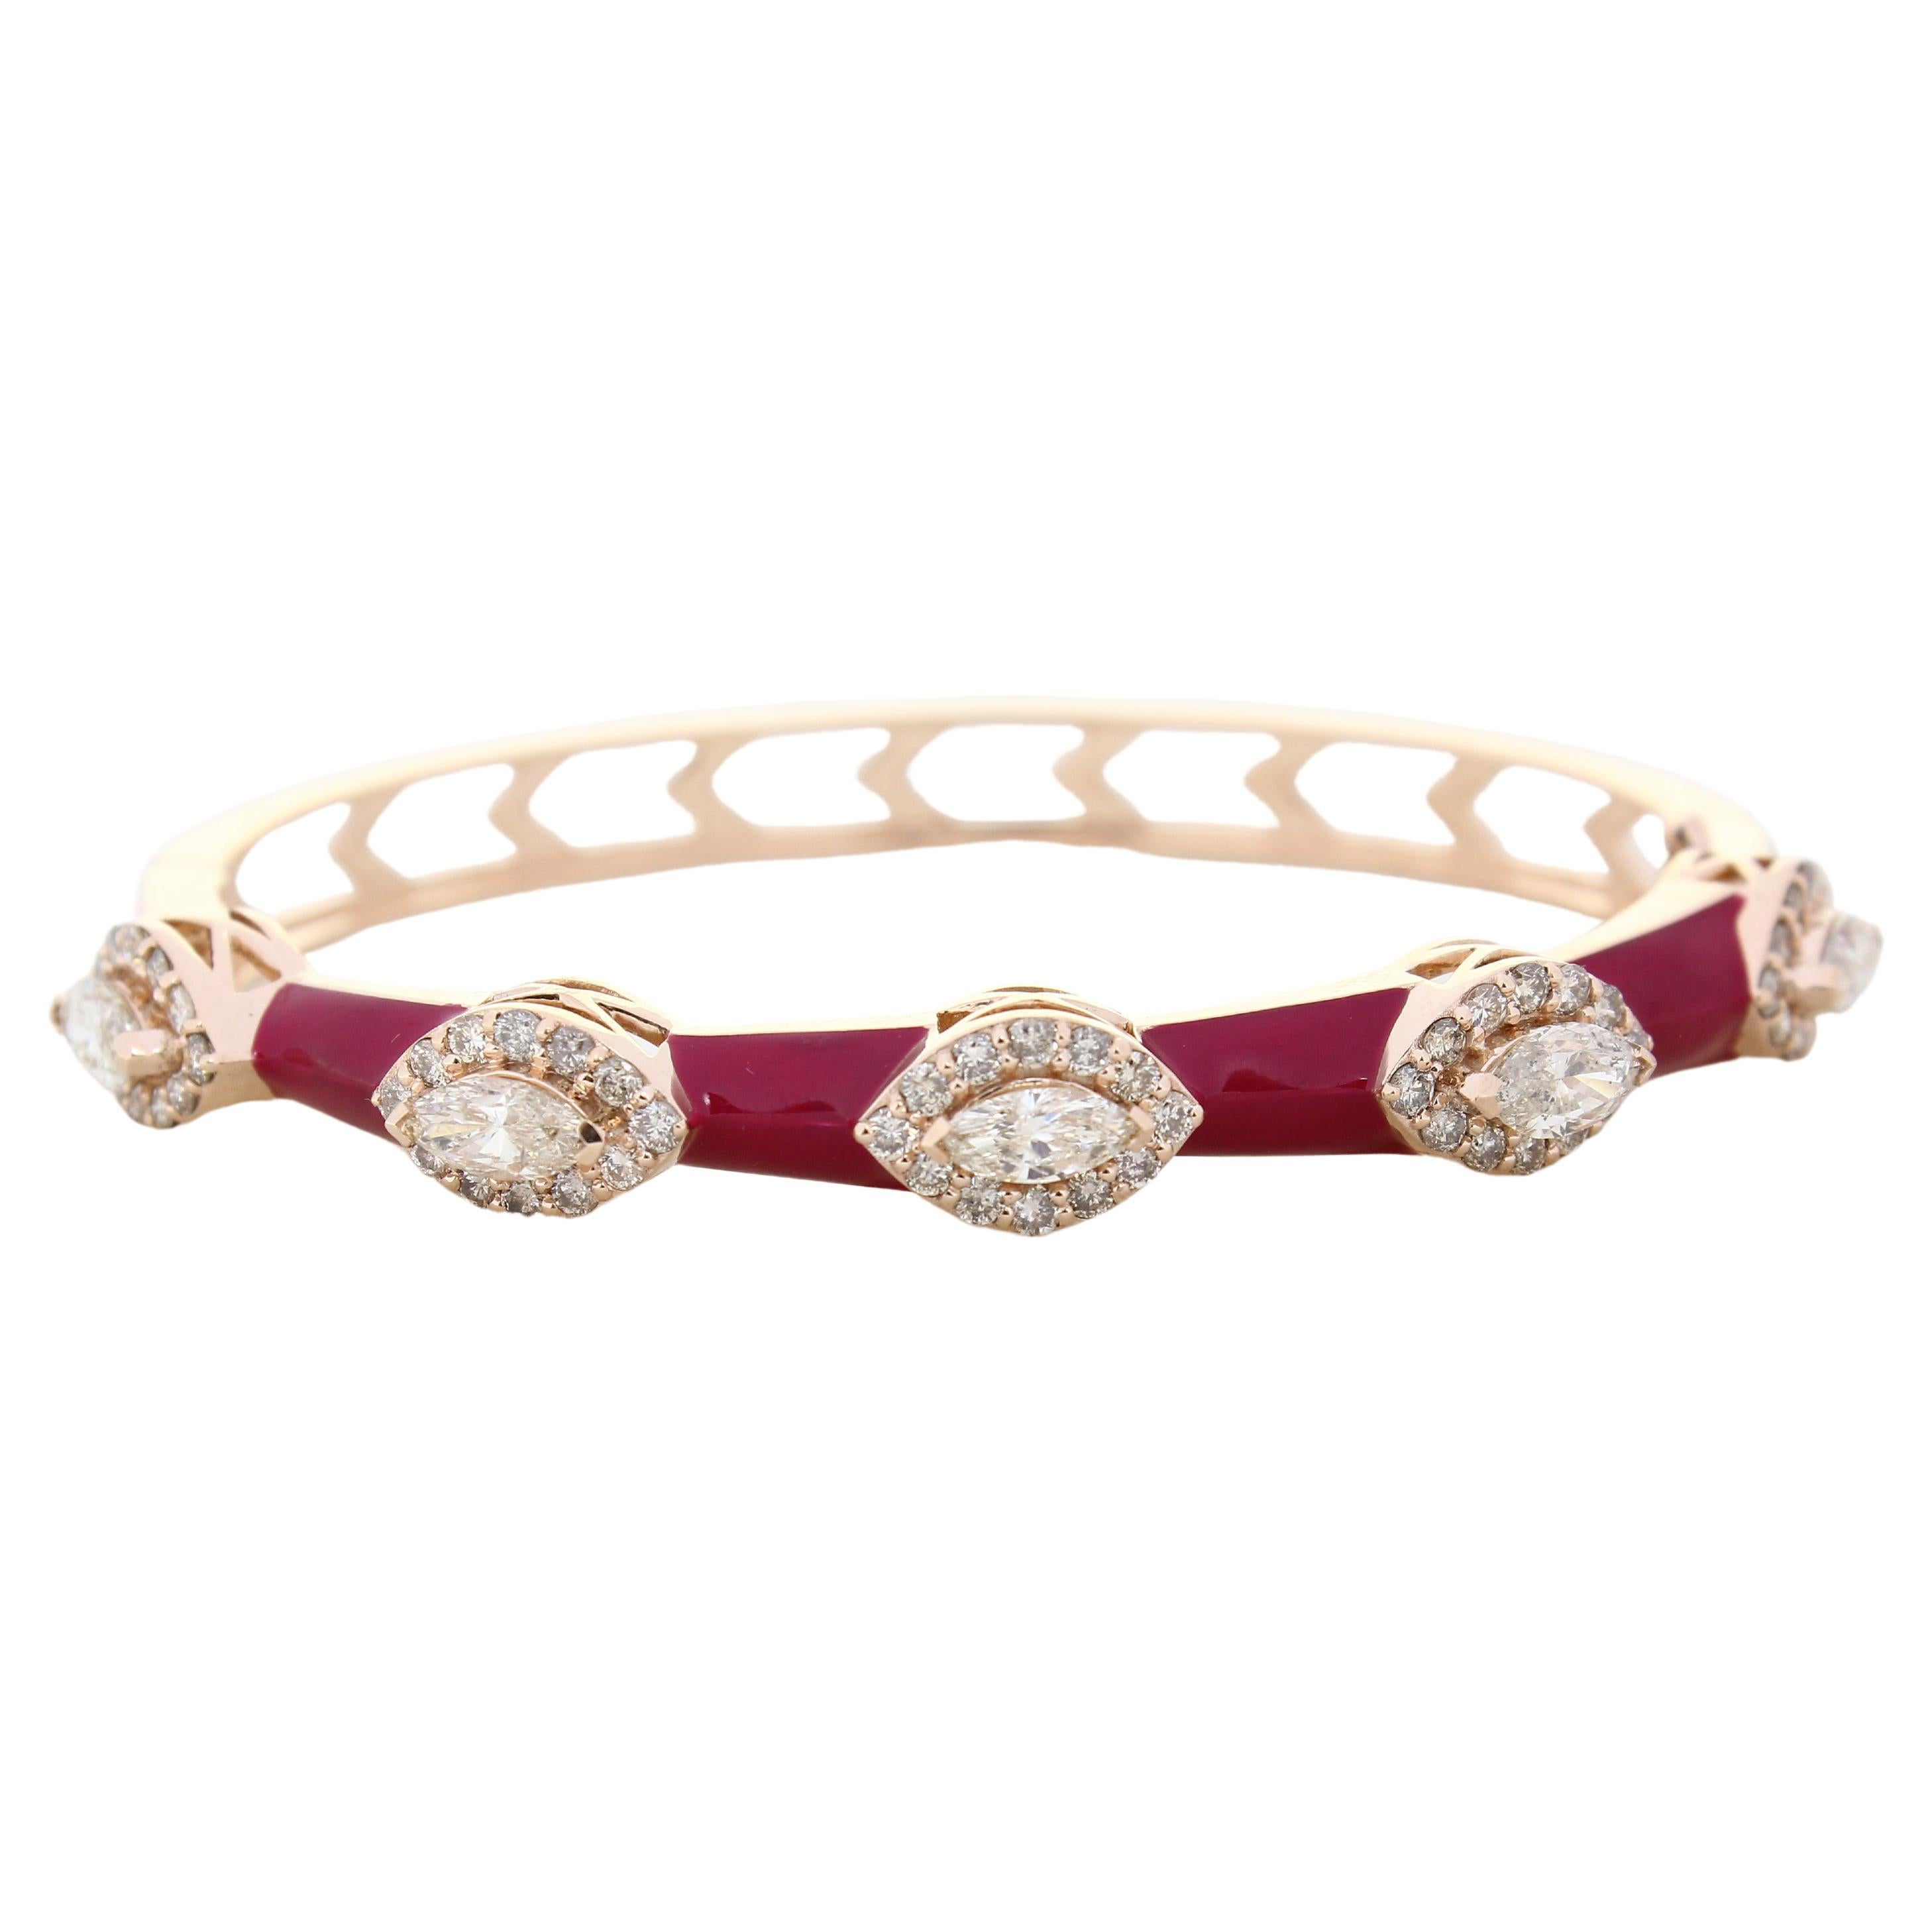 Marquise Diamond Bracelet with Colored Enameling in 18k Solid Gold